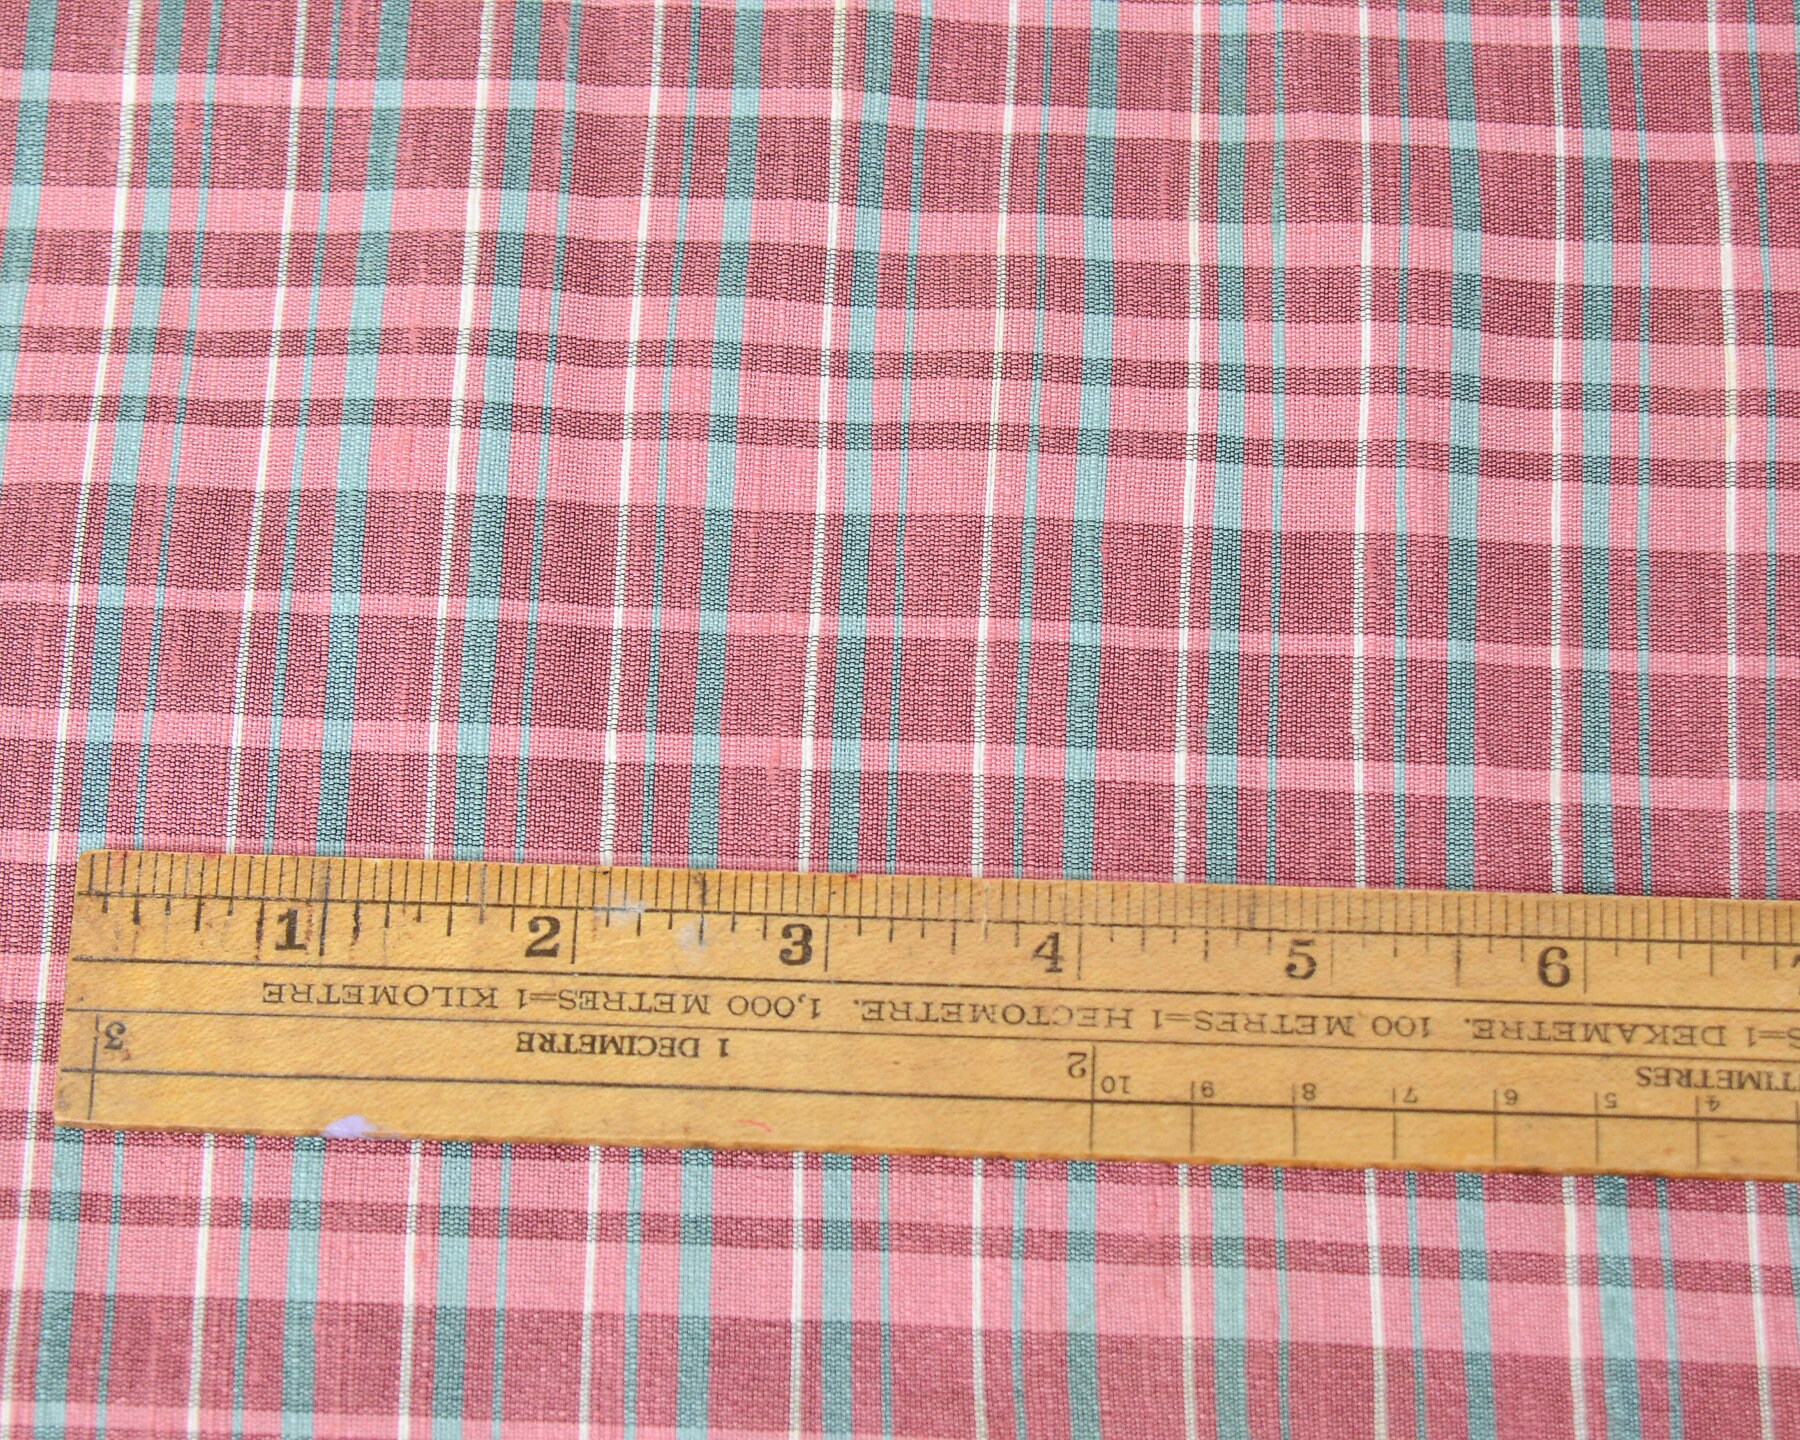 1940s-50s Vintage Fabric Rayon Cotton Check Plaid Upholstery | Etsy